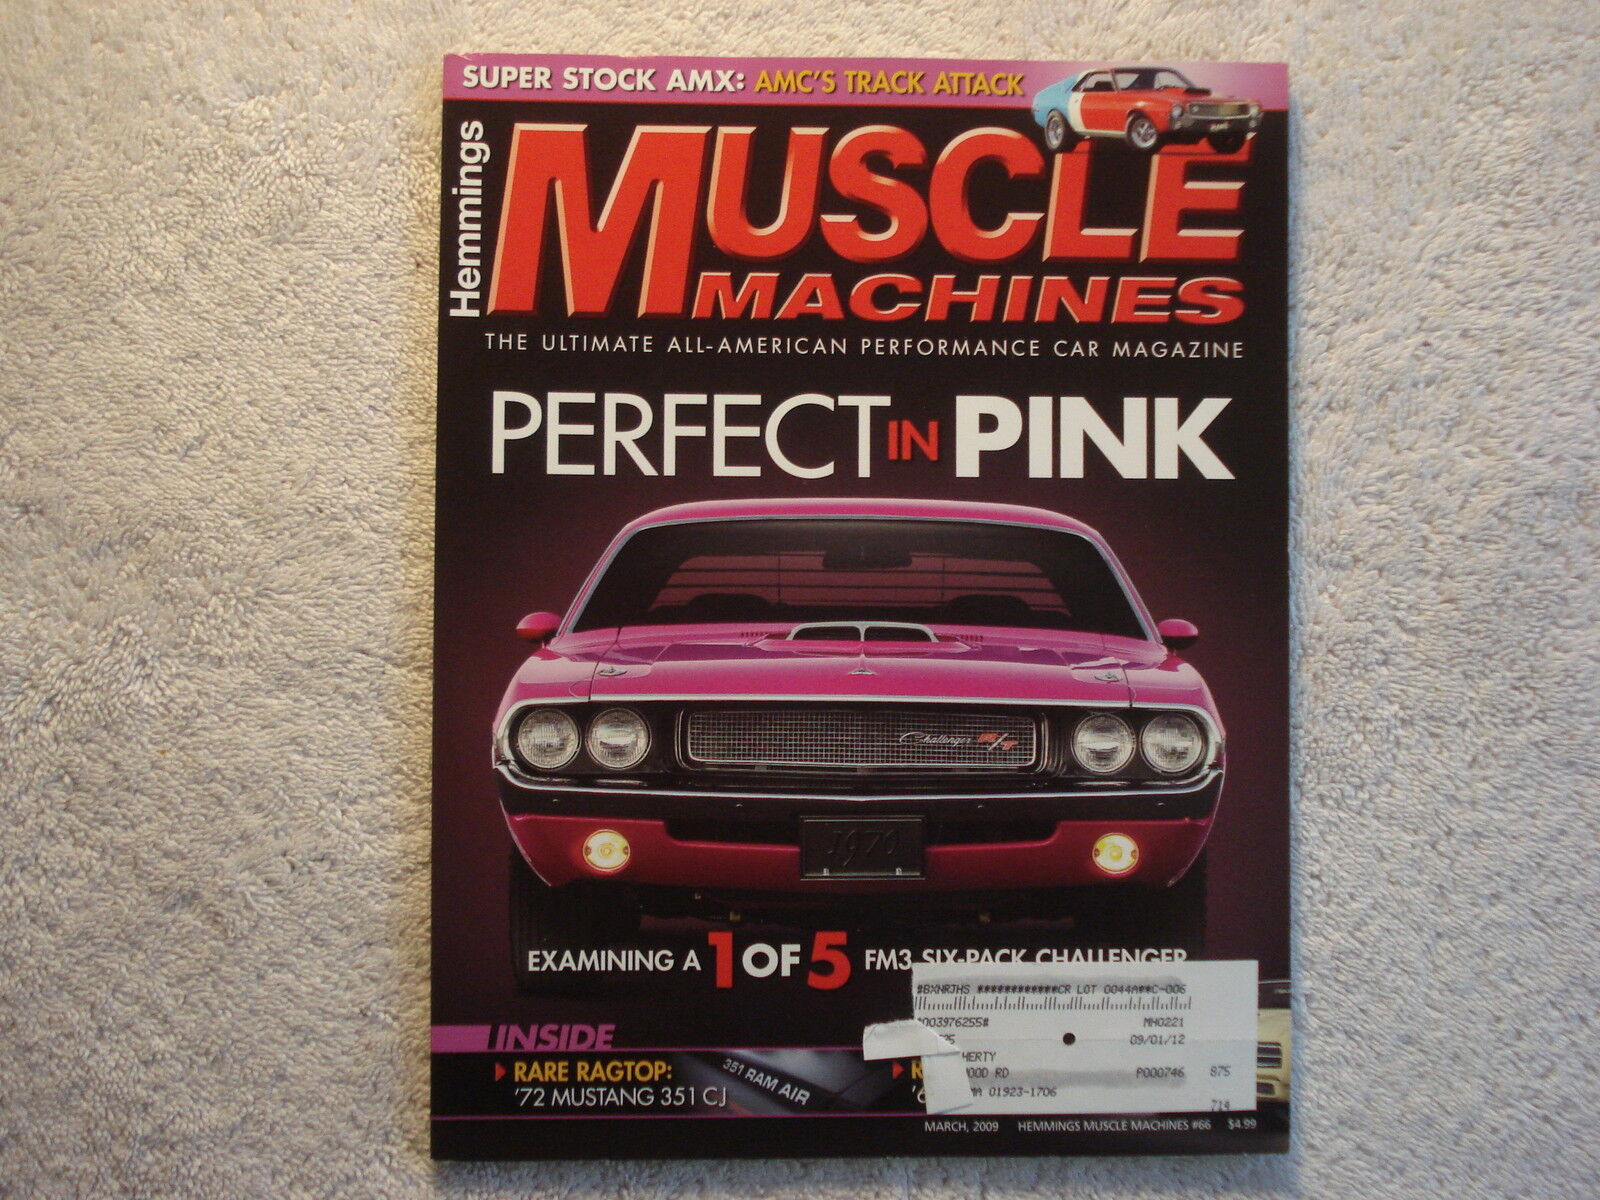 Muscle Machines 2009 March 1972 Mustang 351 CJ 1964 Ford Falcon 1969 GTO conv